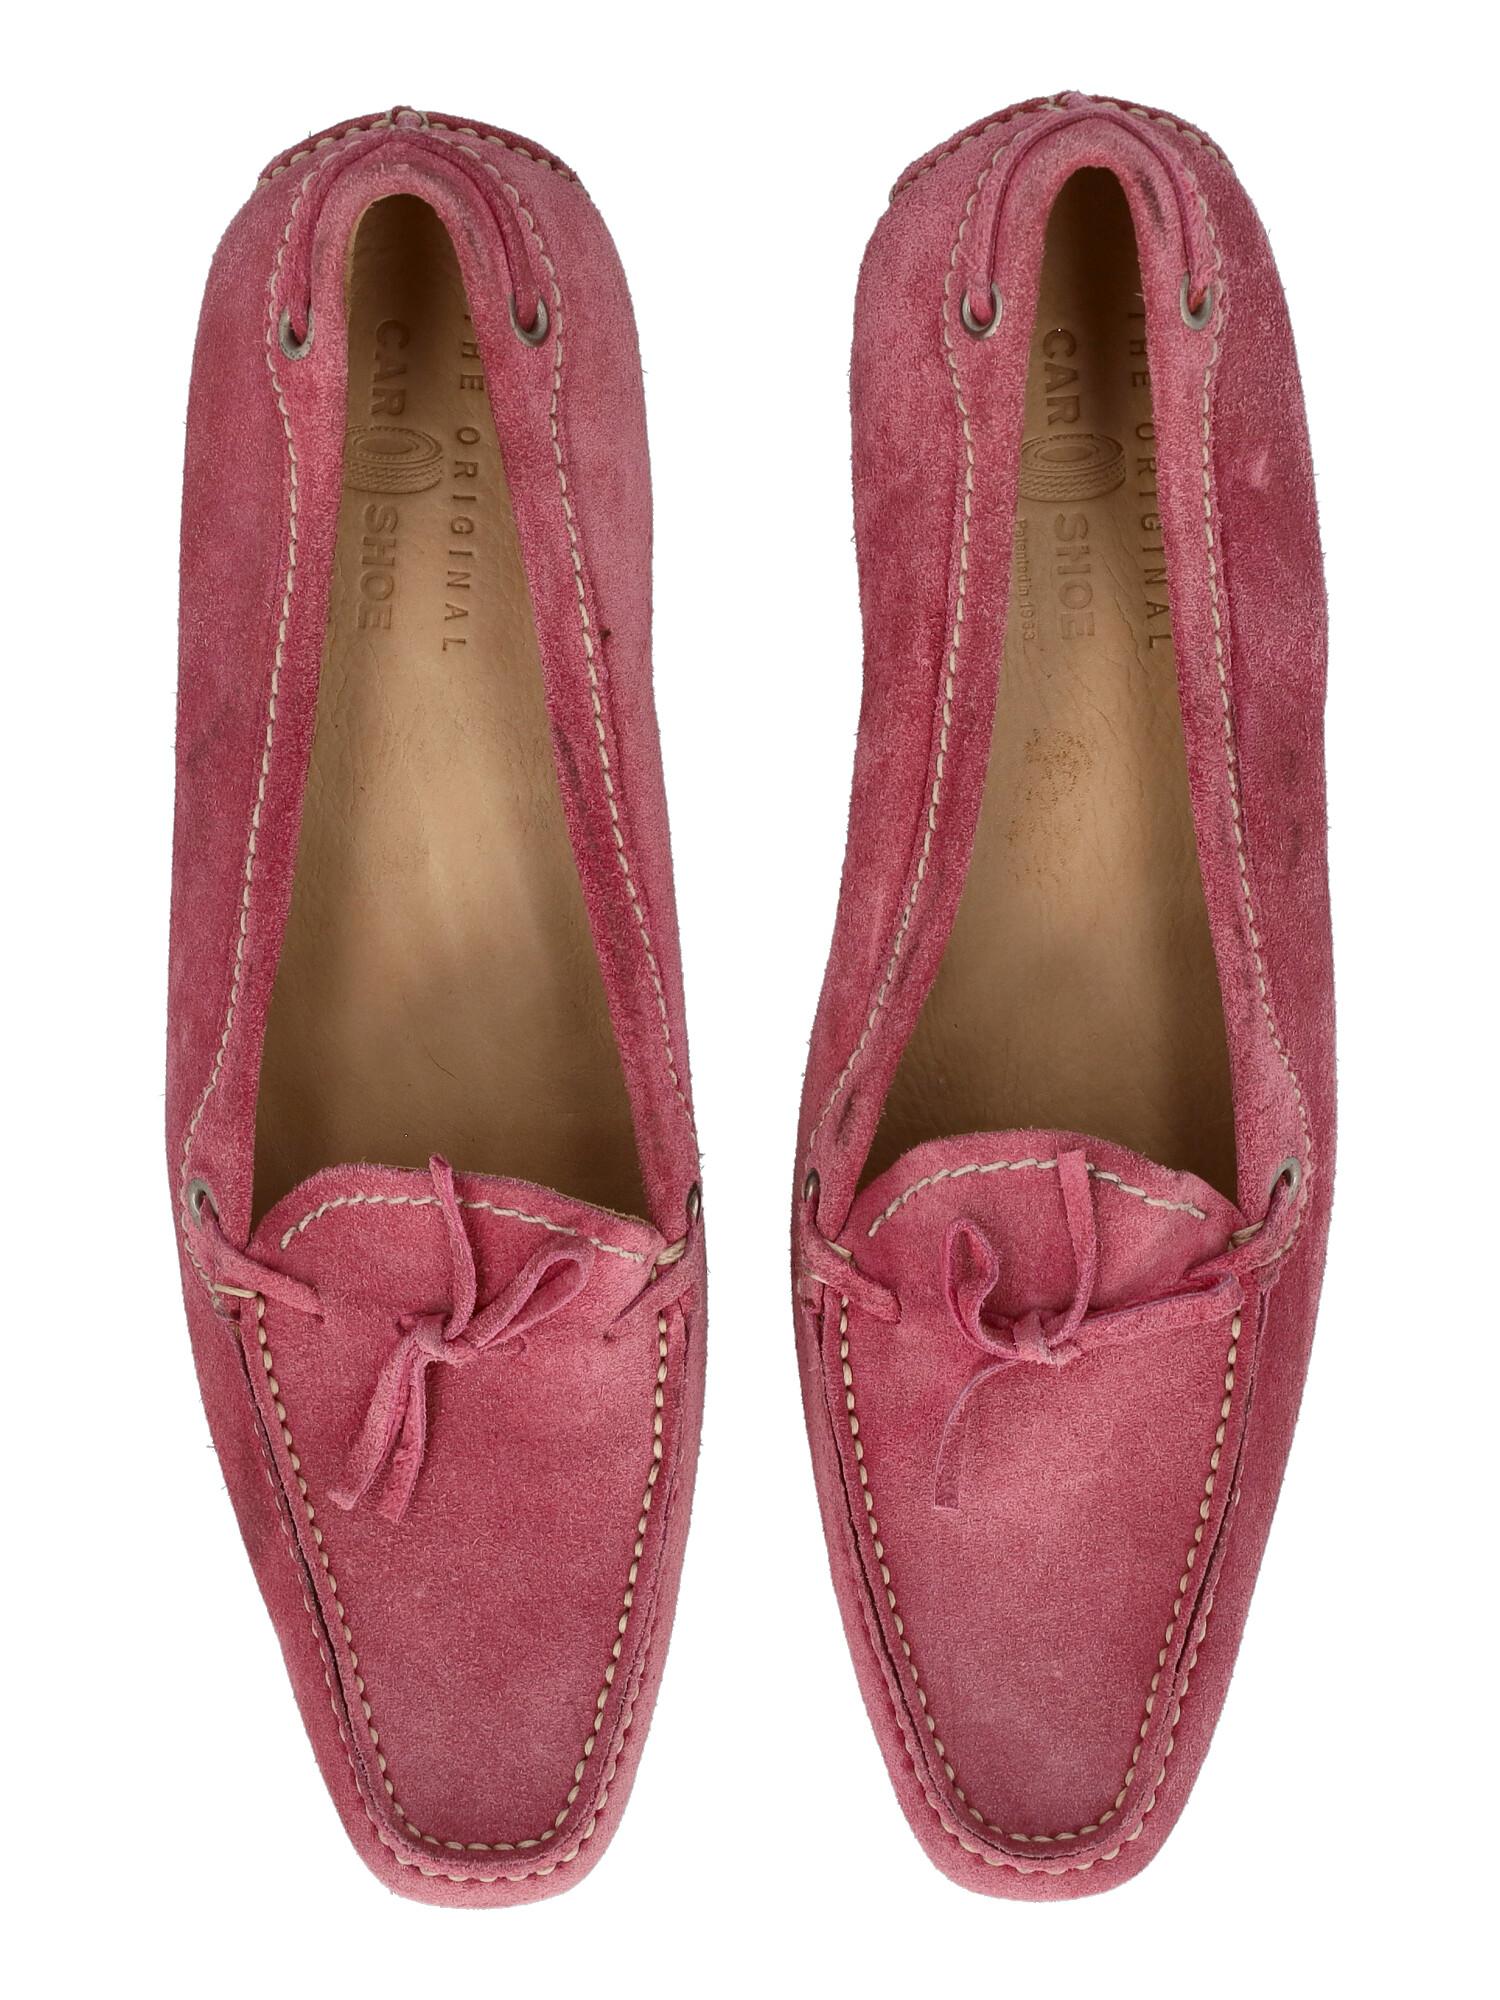 Car Shoe Women Loafers Pink Leather EU 37 For Sale 1